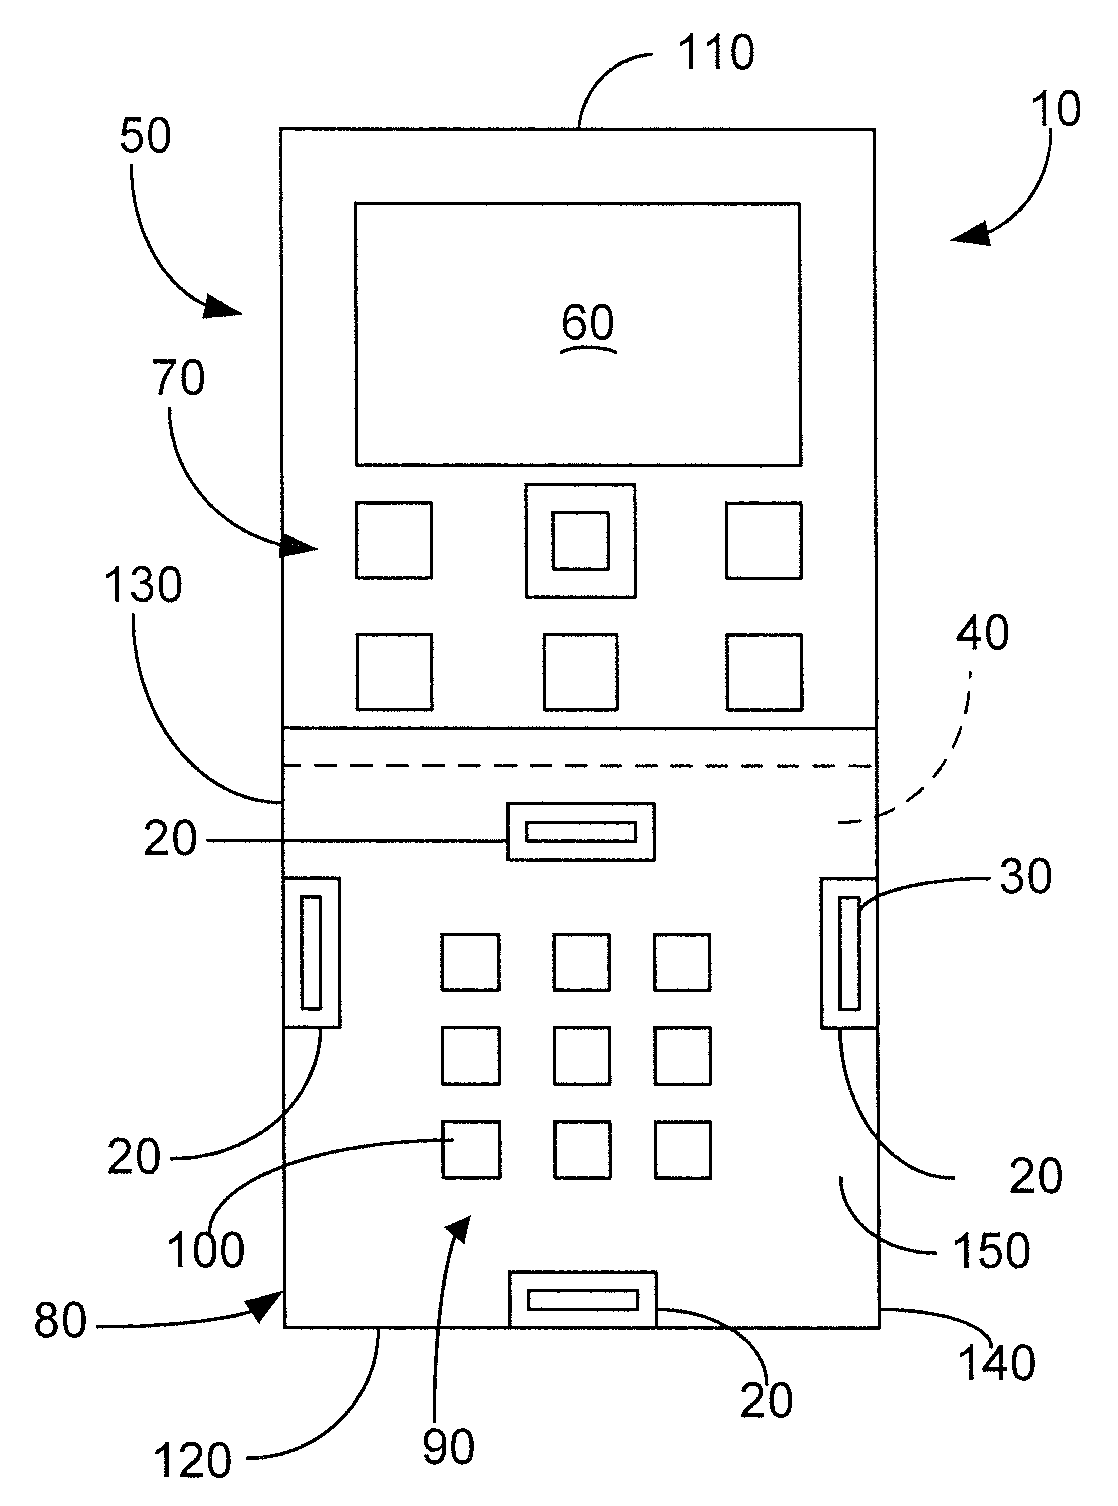 Wireless communication device including a socket for a removable memory device and method of using the same